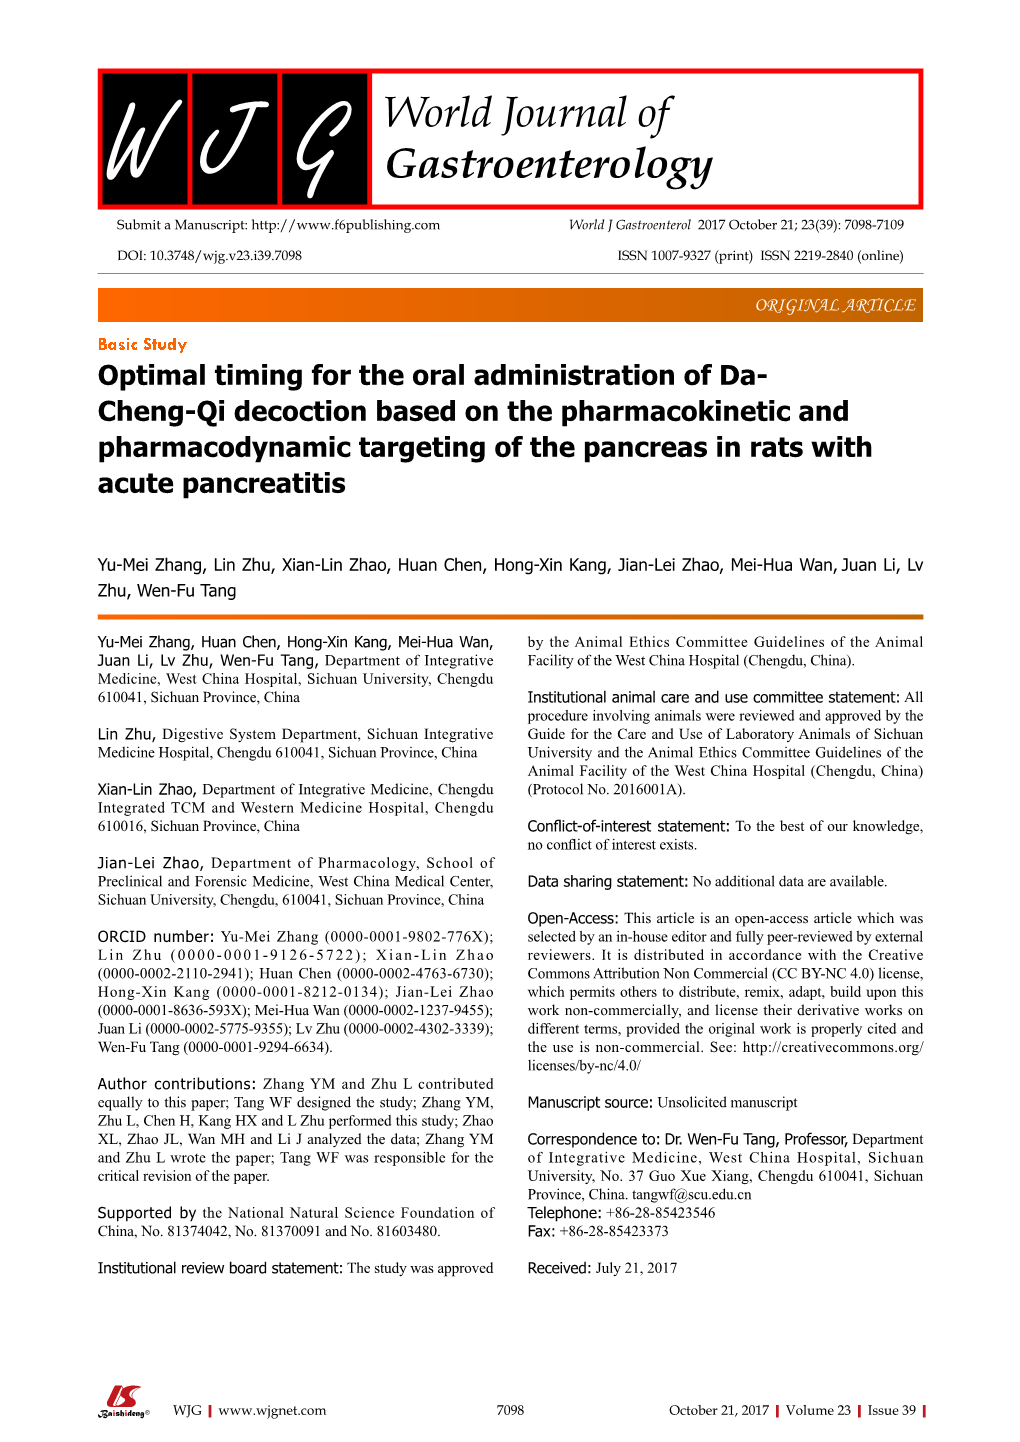 Optimal Timing for the Oral Administration of Da- Cheng-Qi